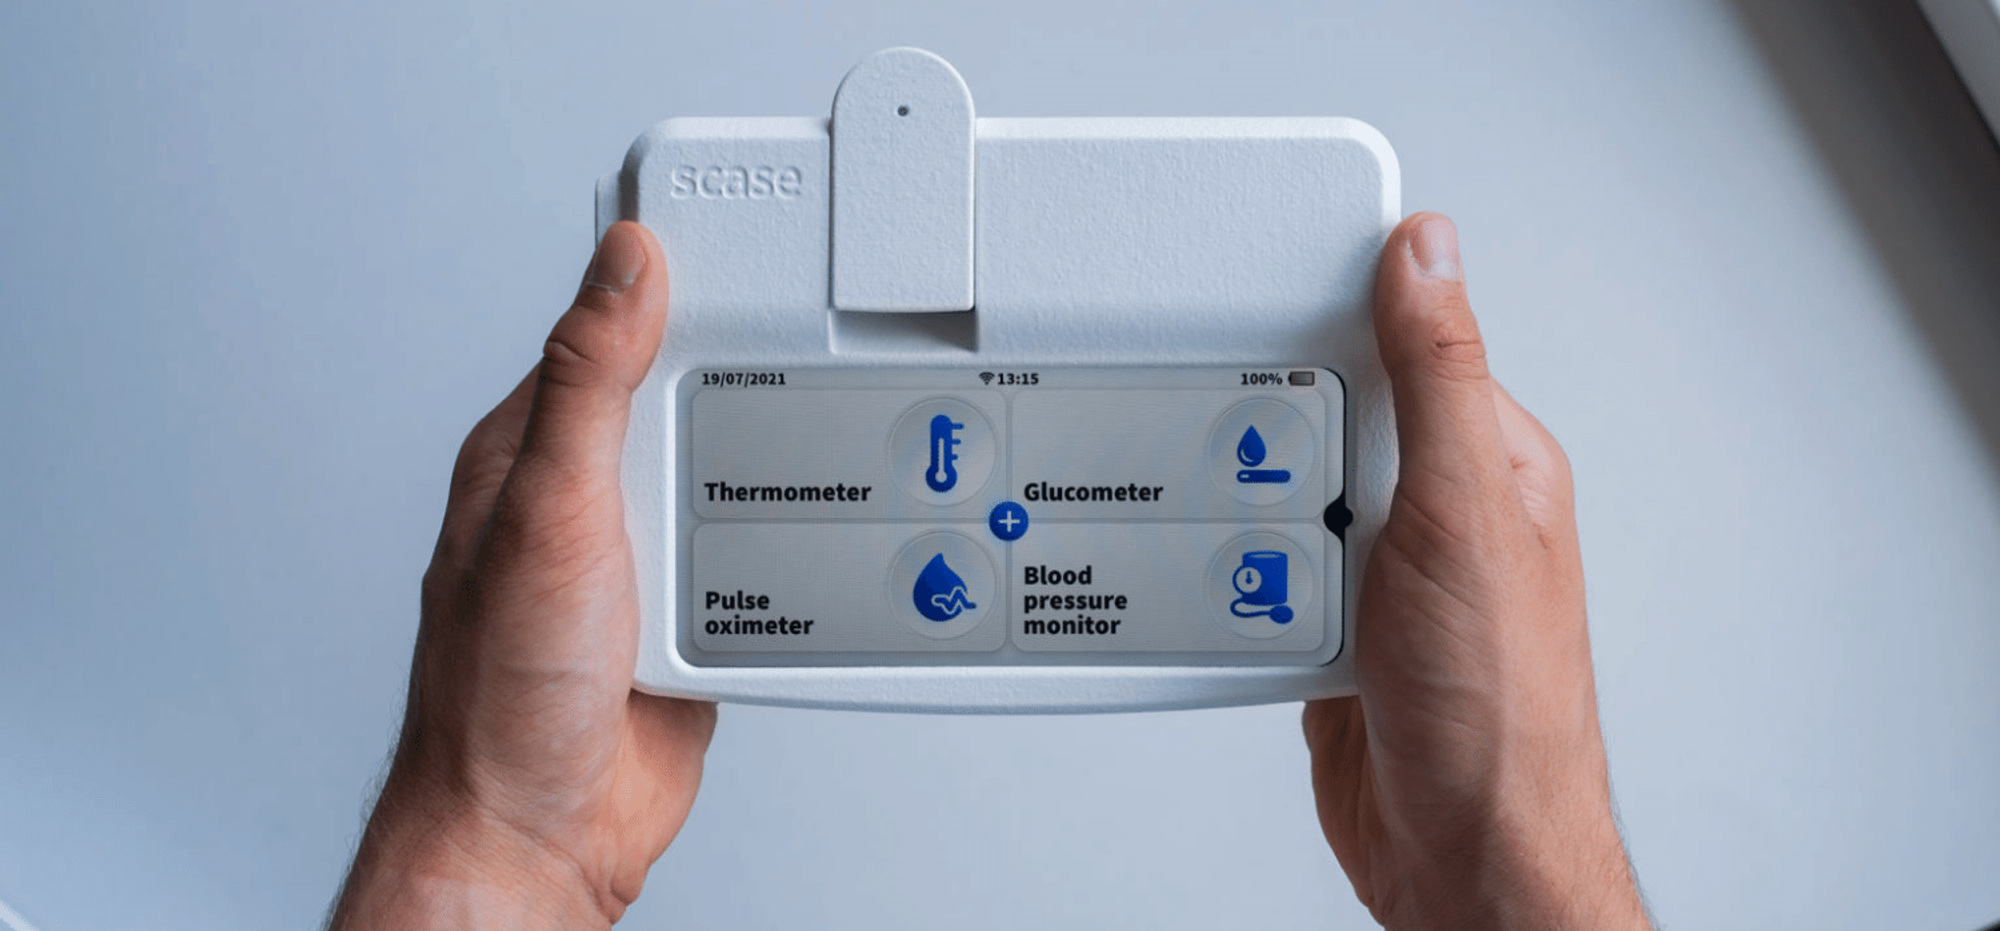 Handheld diagnostic device brings care to patients - Springwise